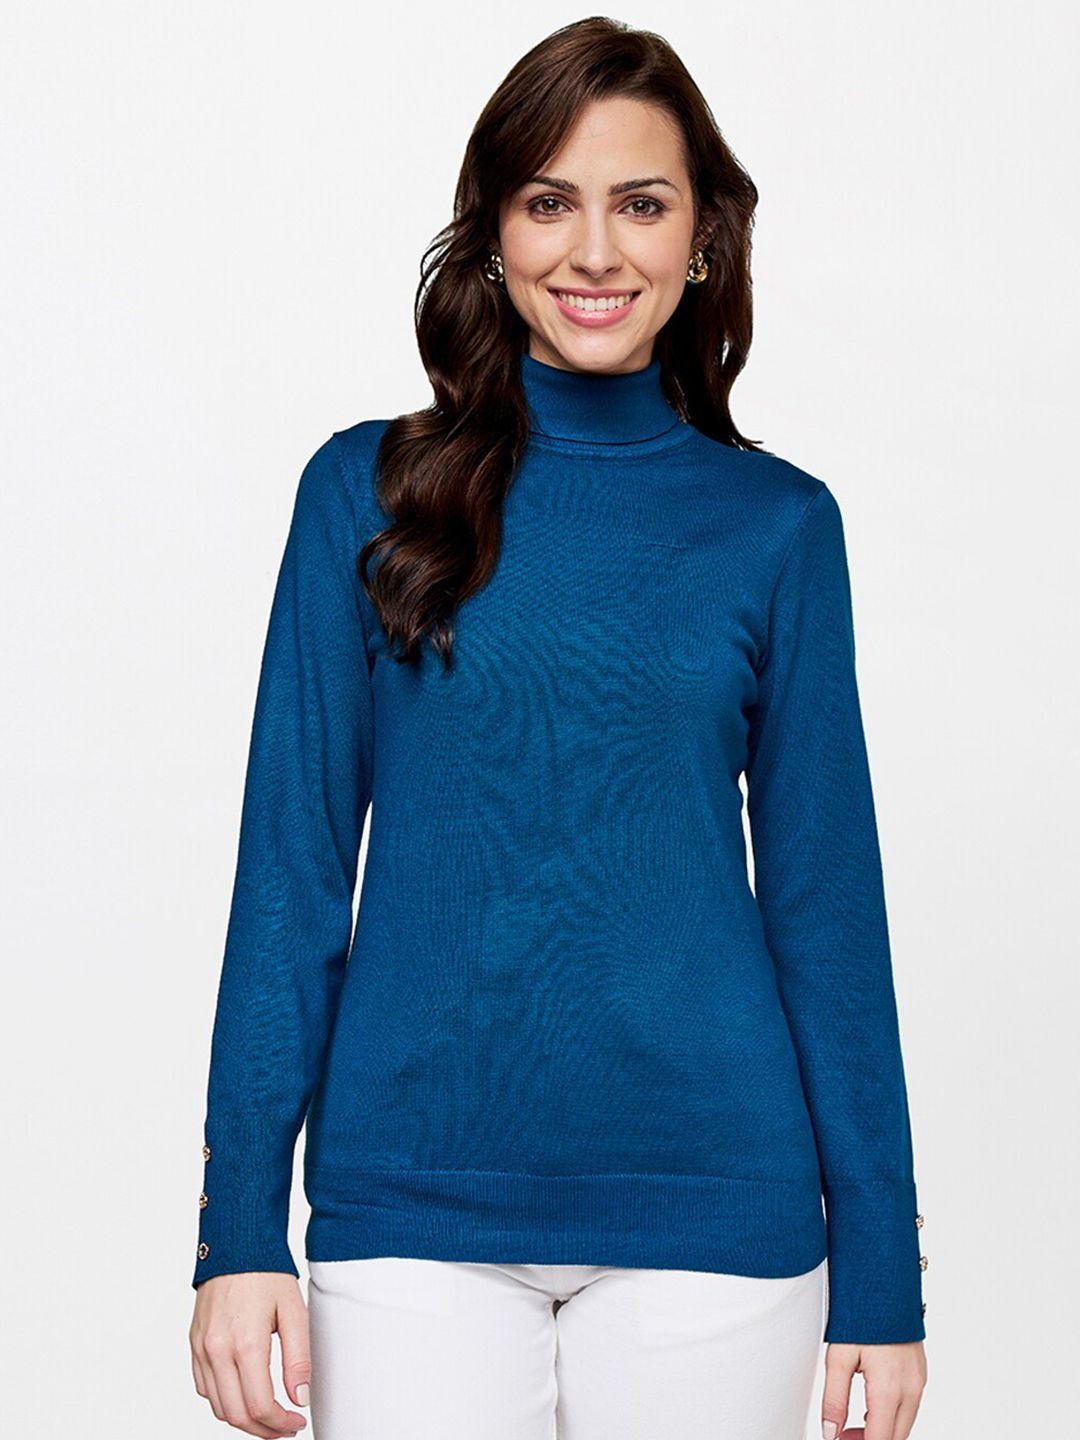 and-teal-solid-turtle-neck-regular-top